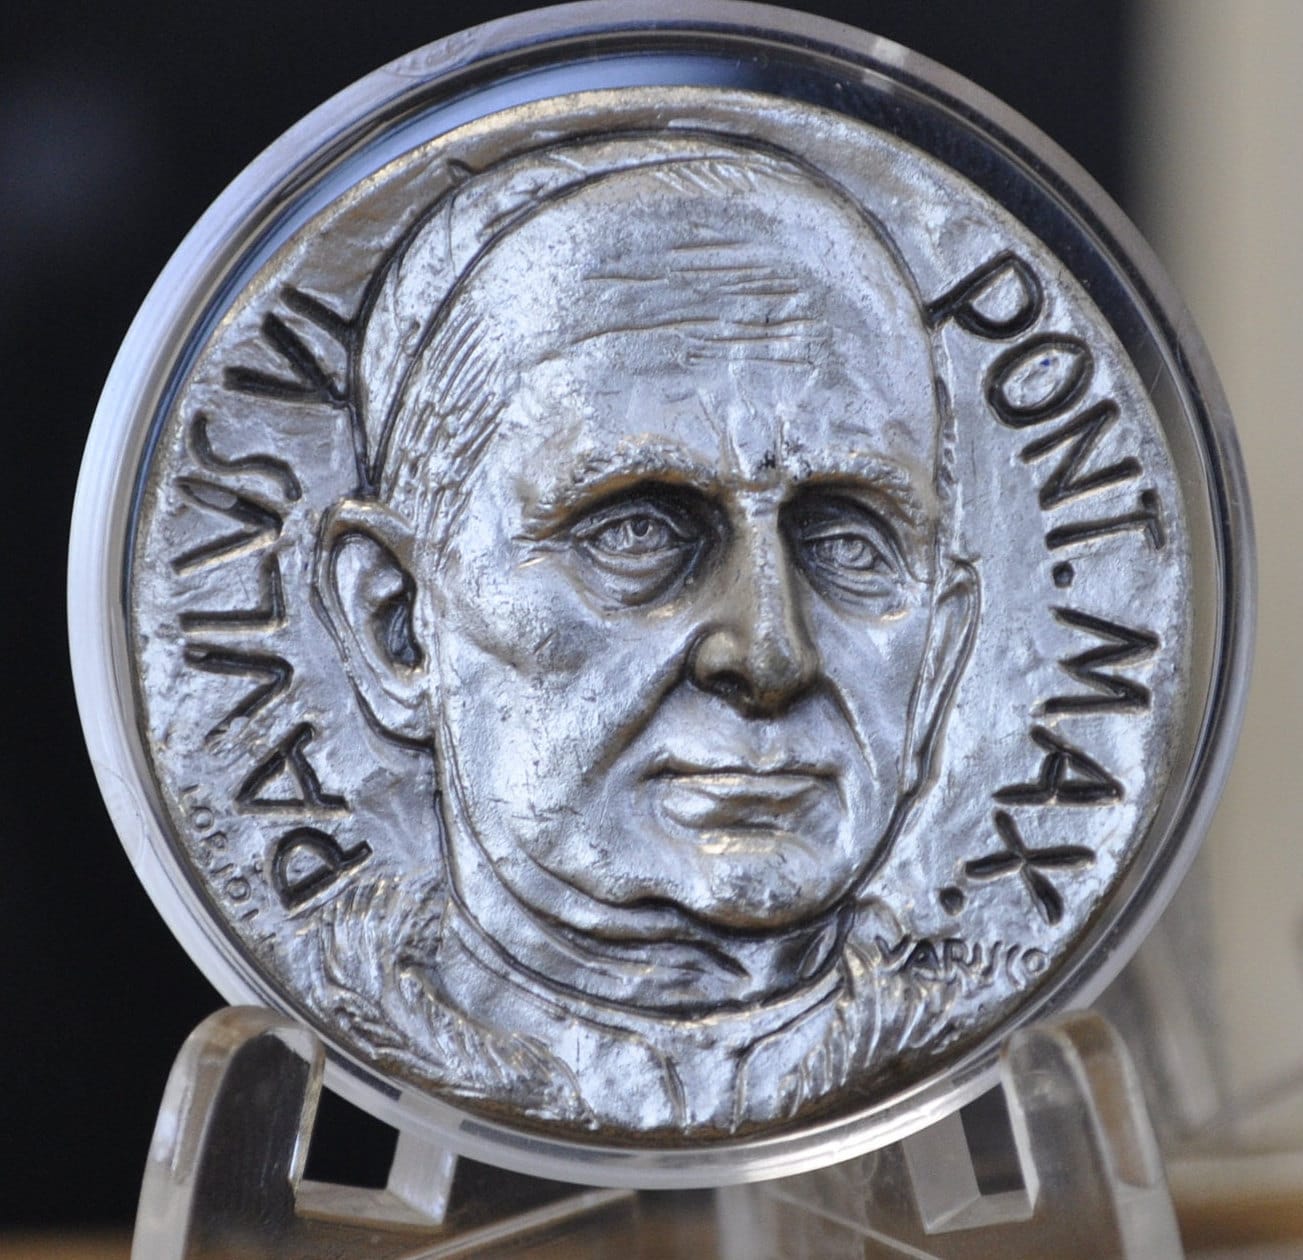 Pope Paul VI (Paulus VI) Medal - Large Medal - Traveling In The Holy Land - St. Peter, St. Peter's Basilica, Mt Calvary - Catholic Medal